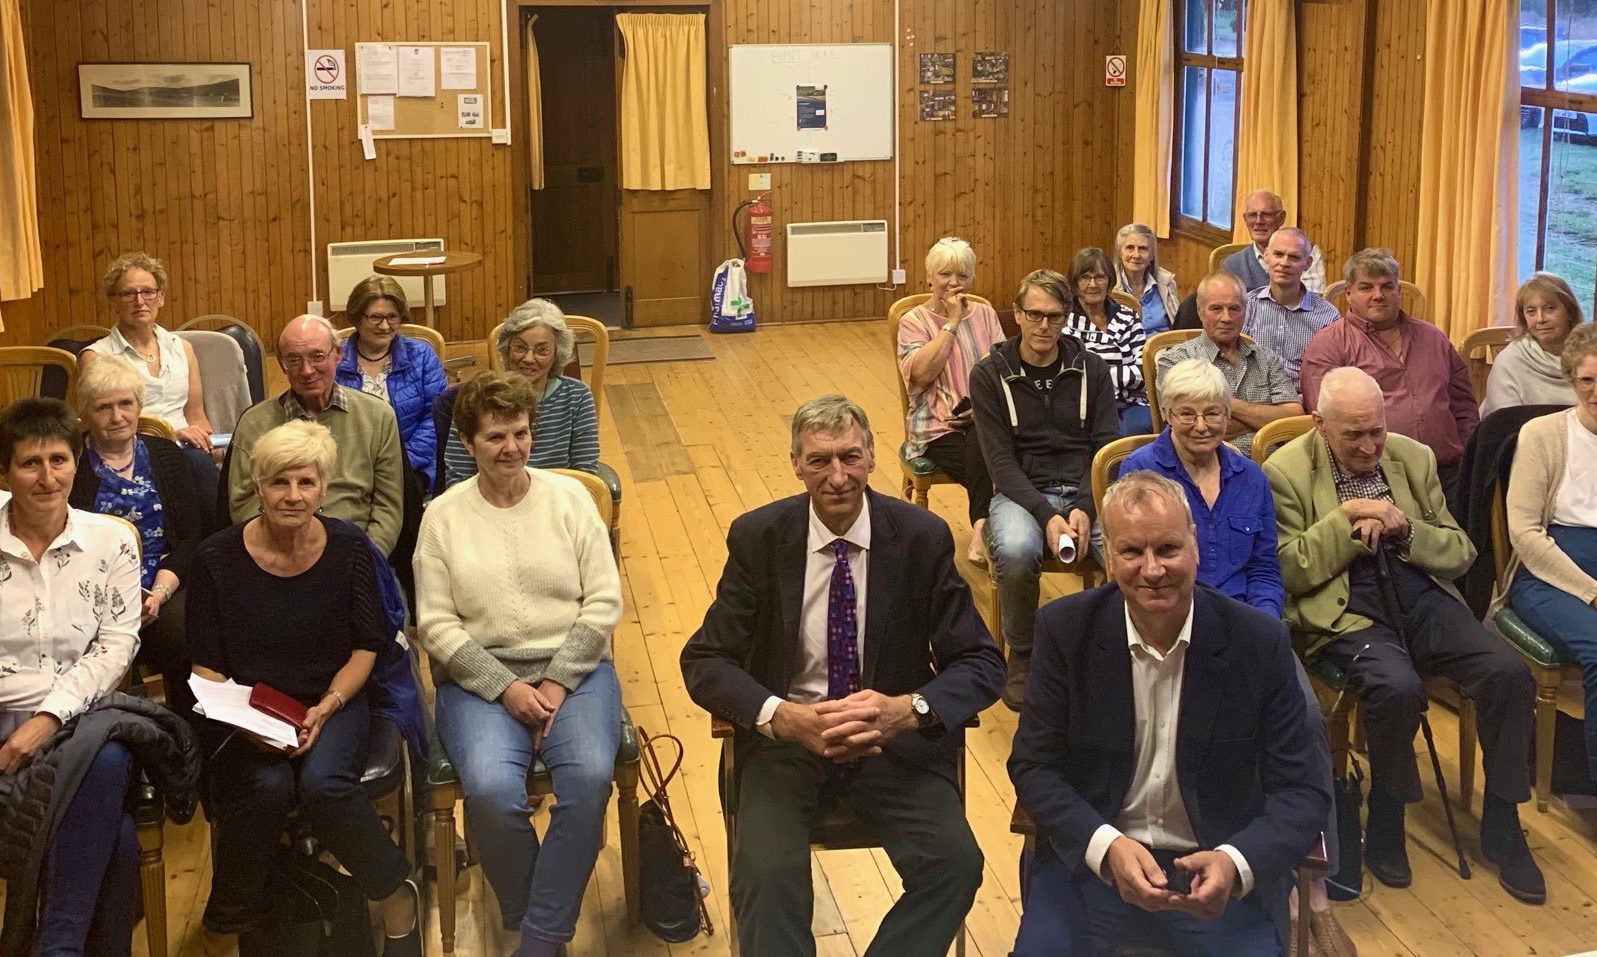 Pete Wishart announced that he has referred the council to Audit Scotland at a public meeting in Tummel Bridge he co-hosted with Cllr Mike Williamson on Wednesday.